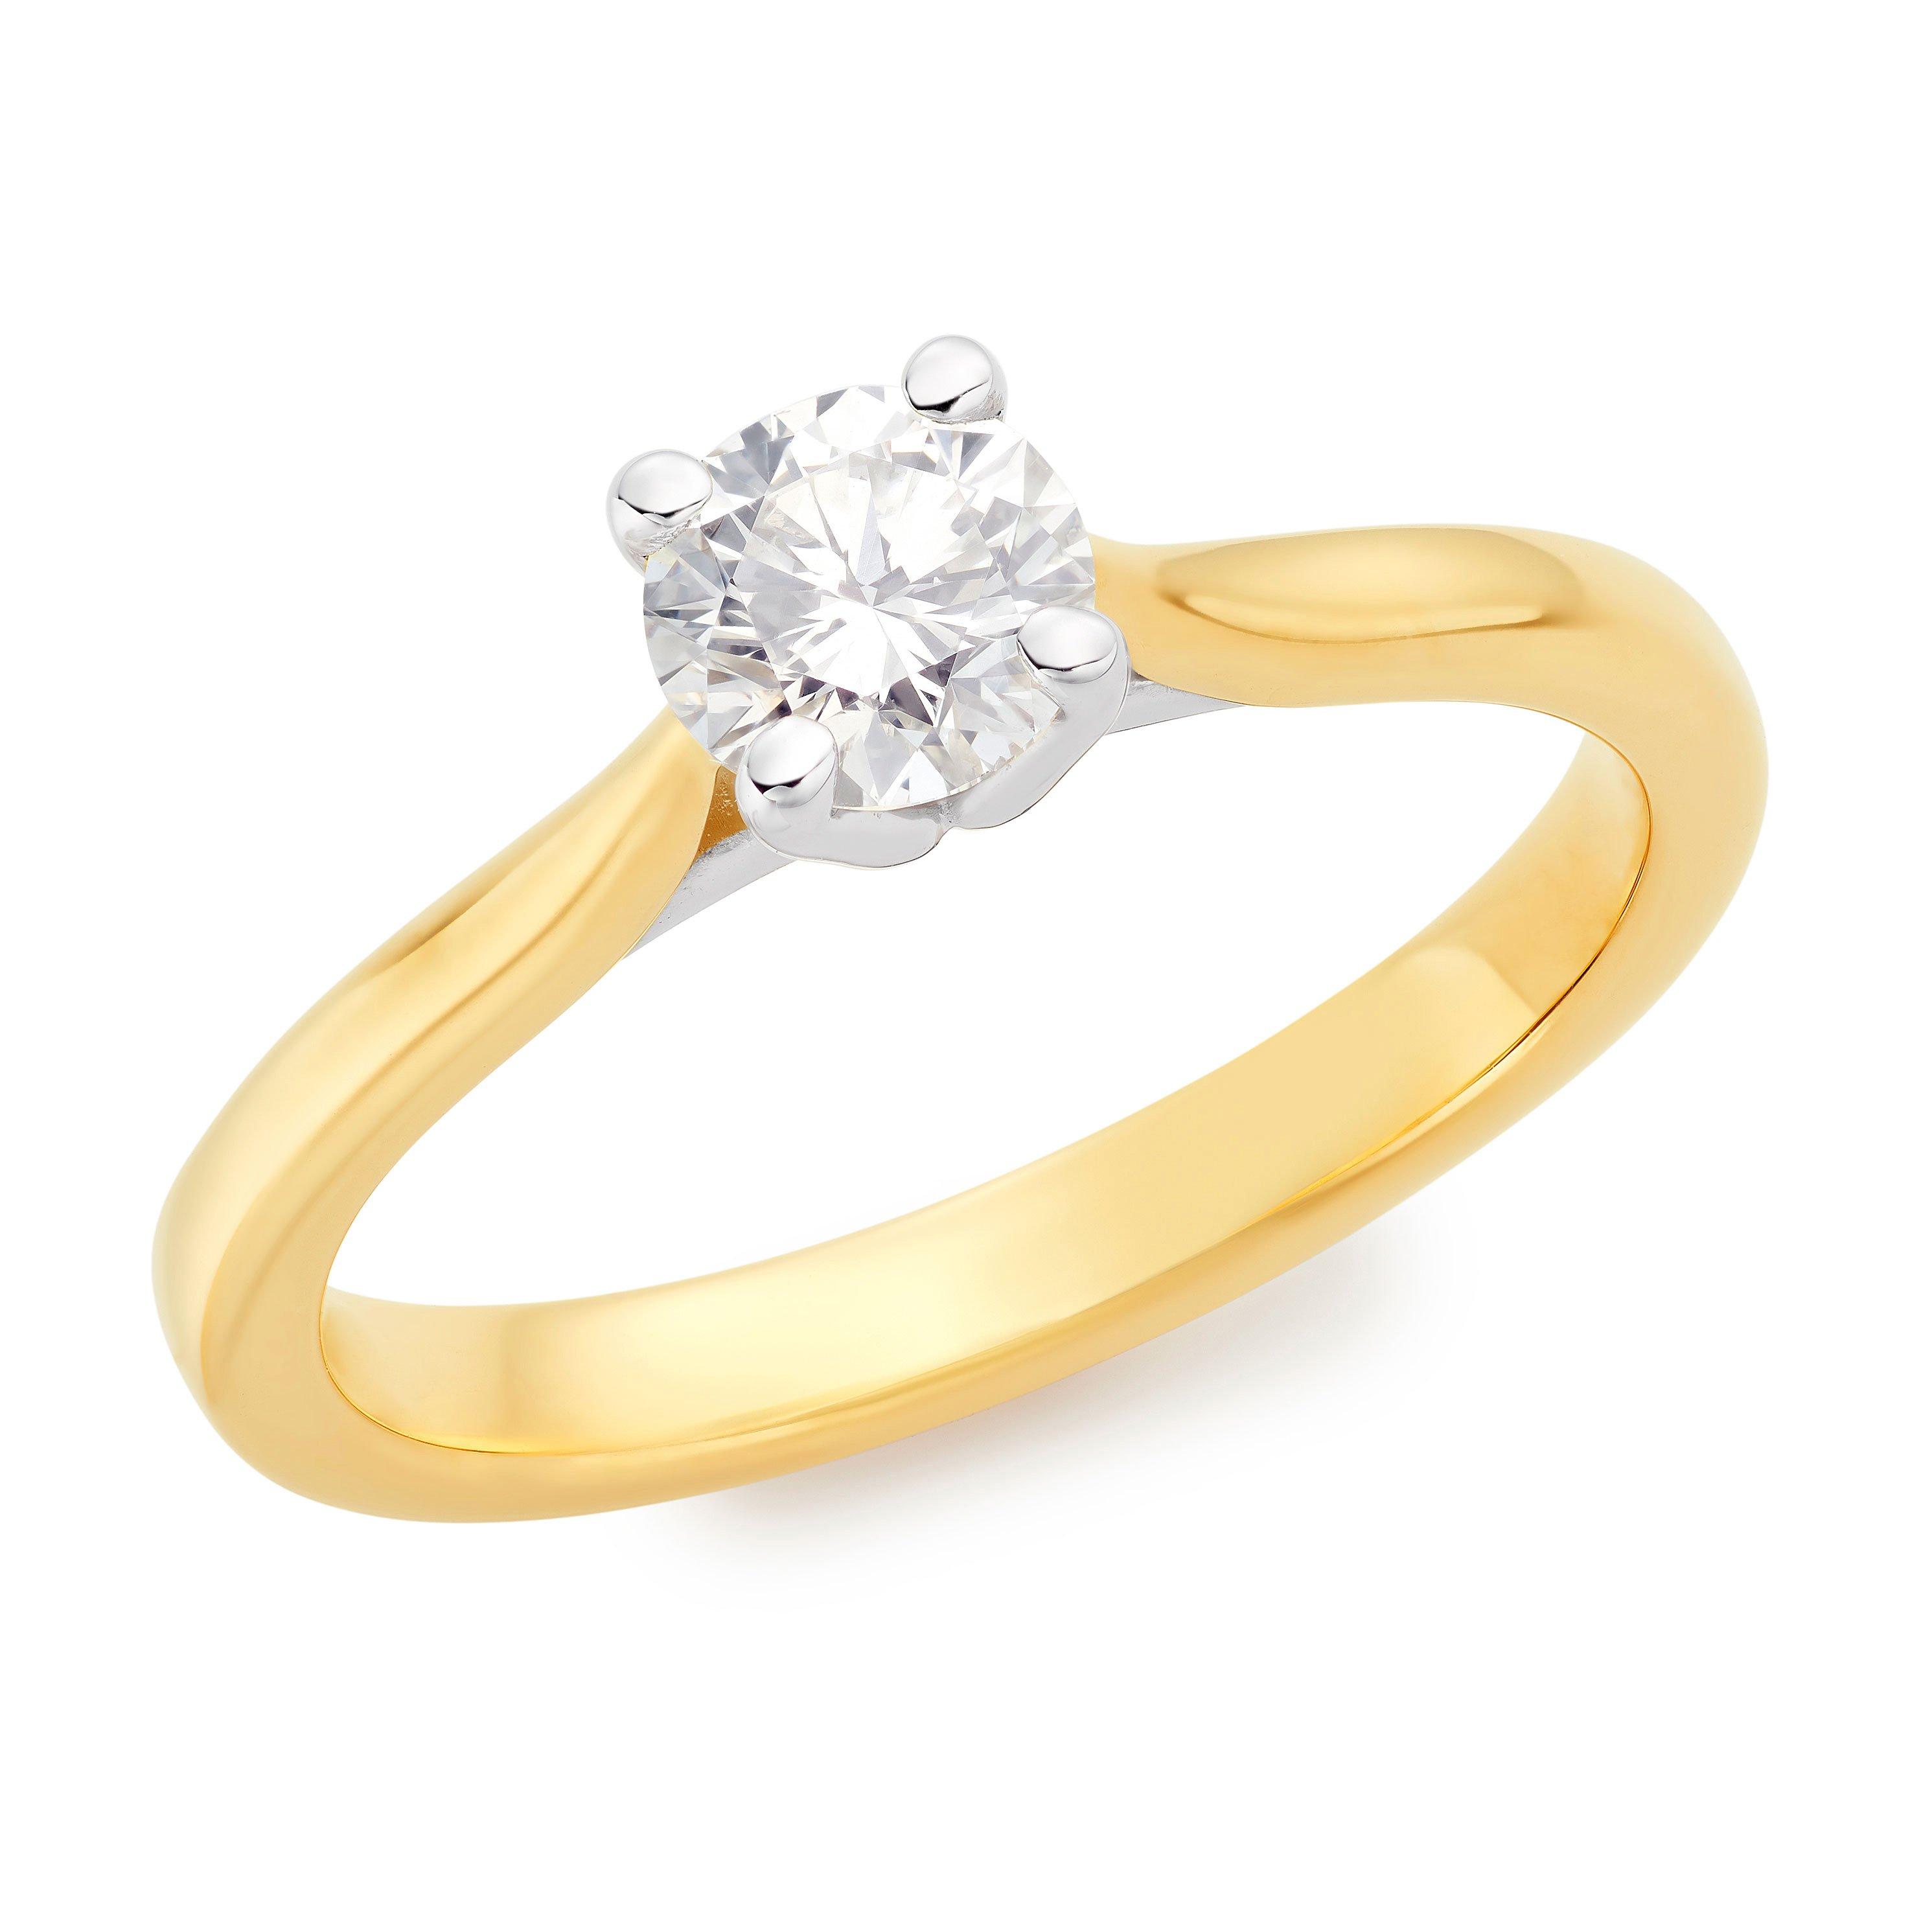 18ct Yellow Gold Diamond Solitaire Ring | 0133644 | Beaverbrooks the ...